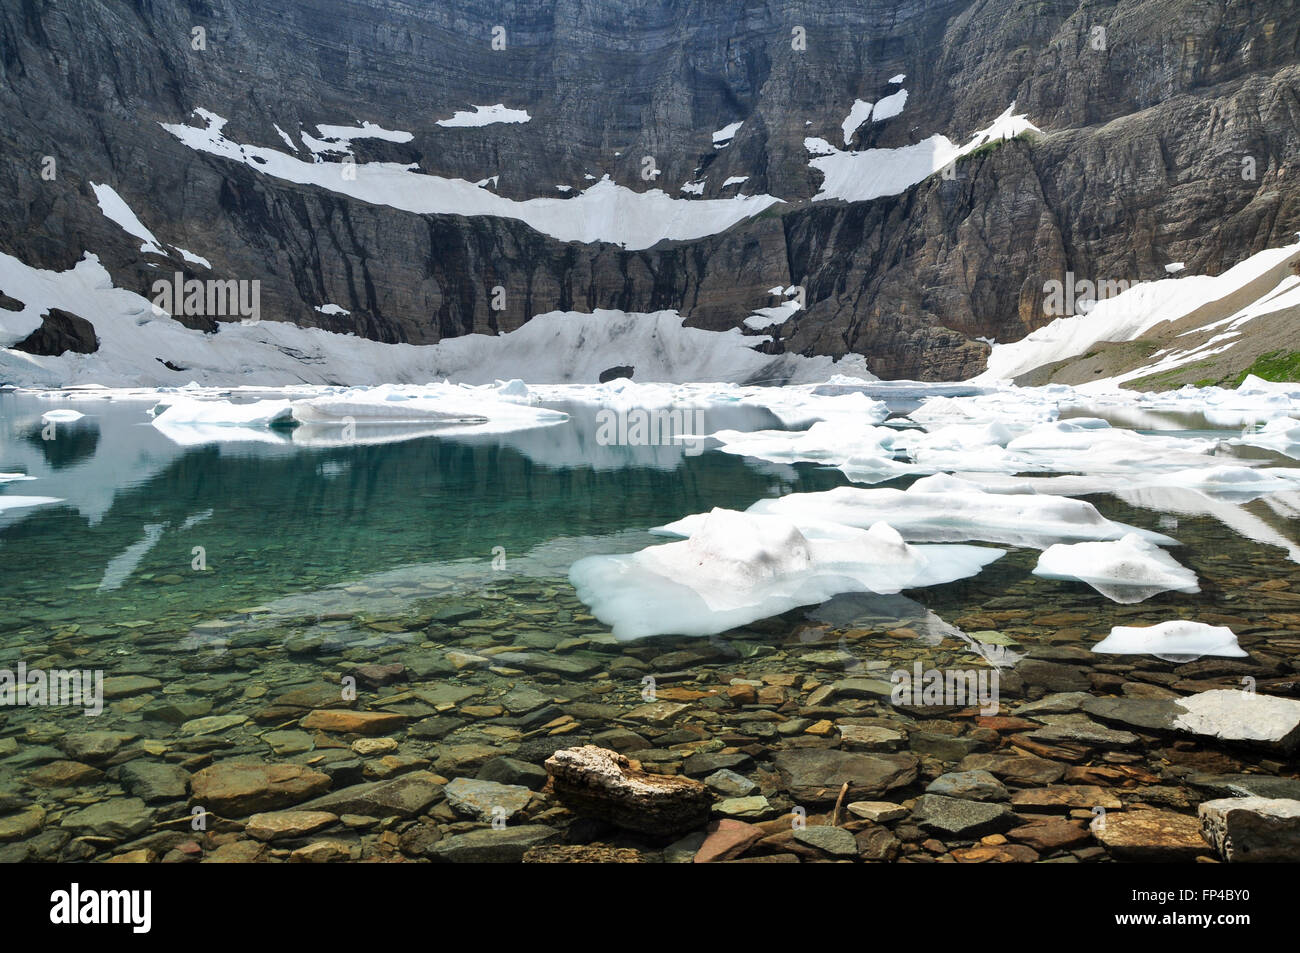 Iceberg Lake in Glacier National Park with small icebergs in the water Stock Photo